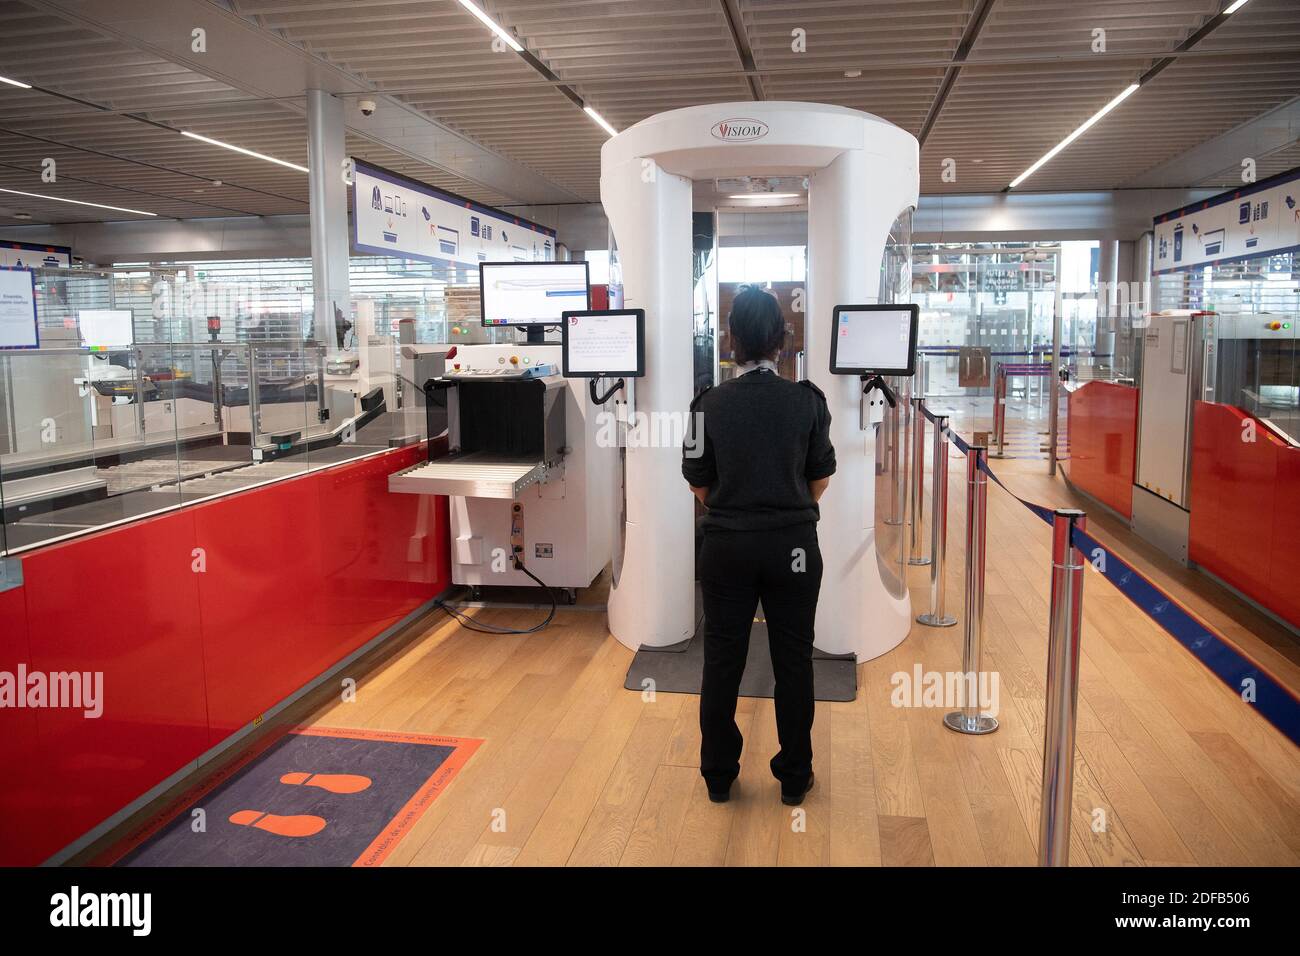 An airport staff member wearing protective face mask stands next to a body  scanner in the boarding area of the Terminal 3 at the Orly airport, in Orly  on the outskirts of